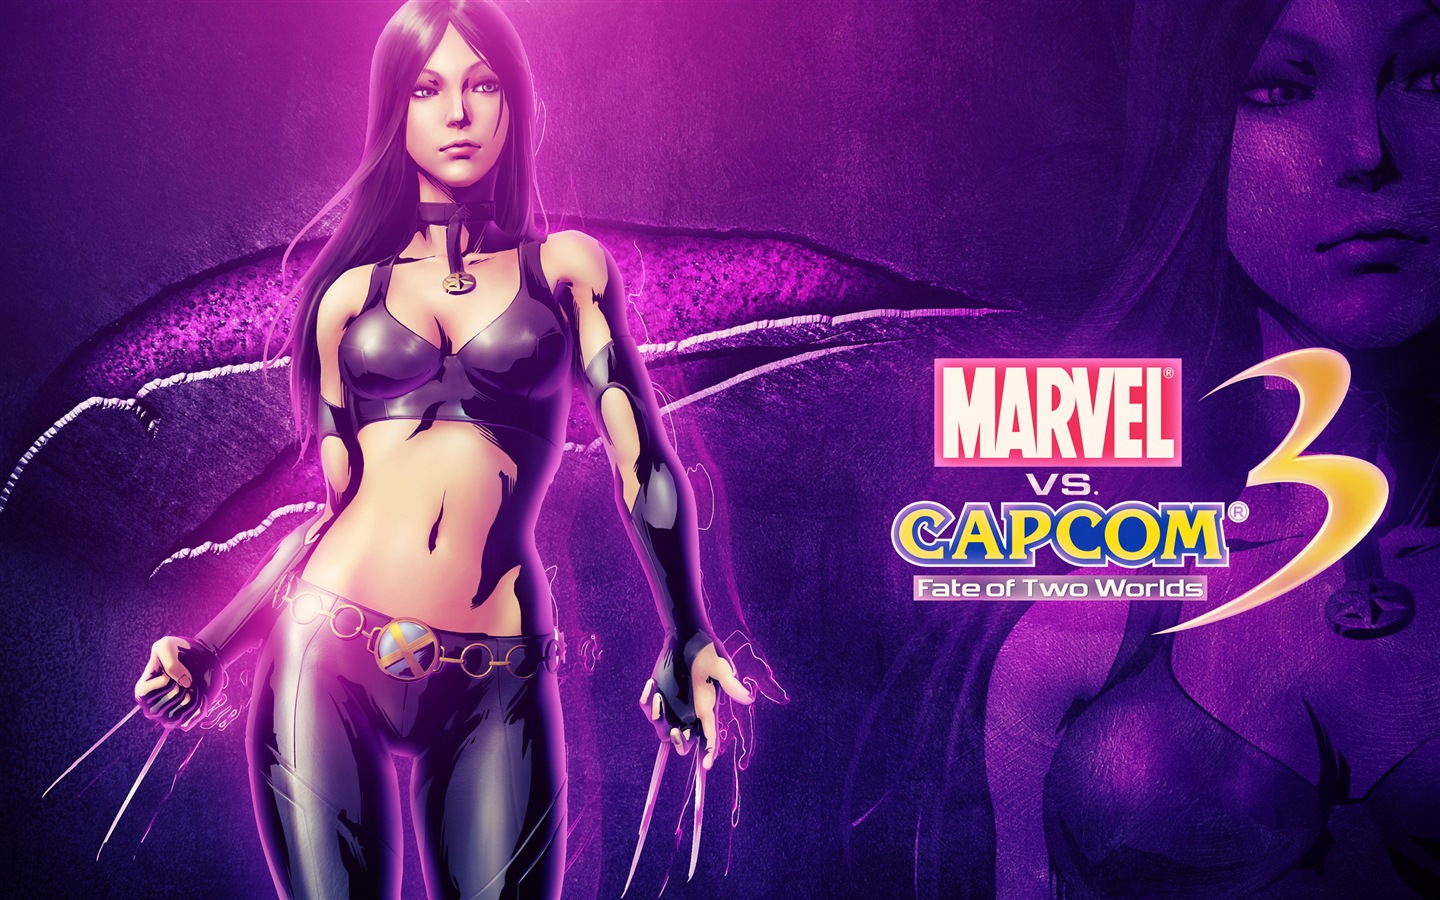 Marvel VS. Capcom 3: Fate of Two Worlds wallpapers HD herní #10 - 1440x900